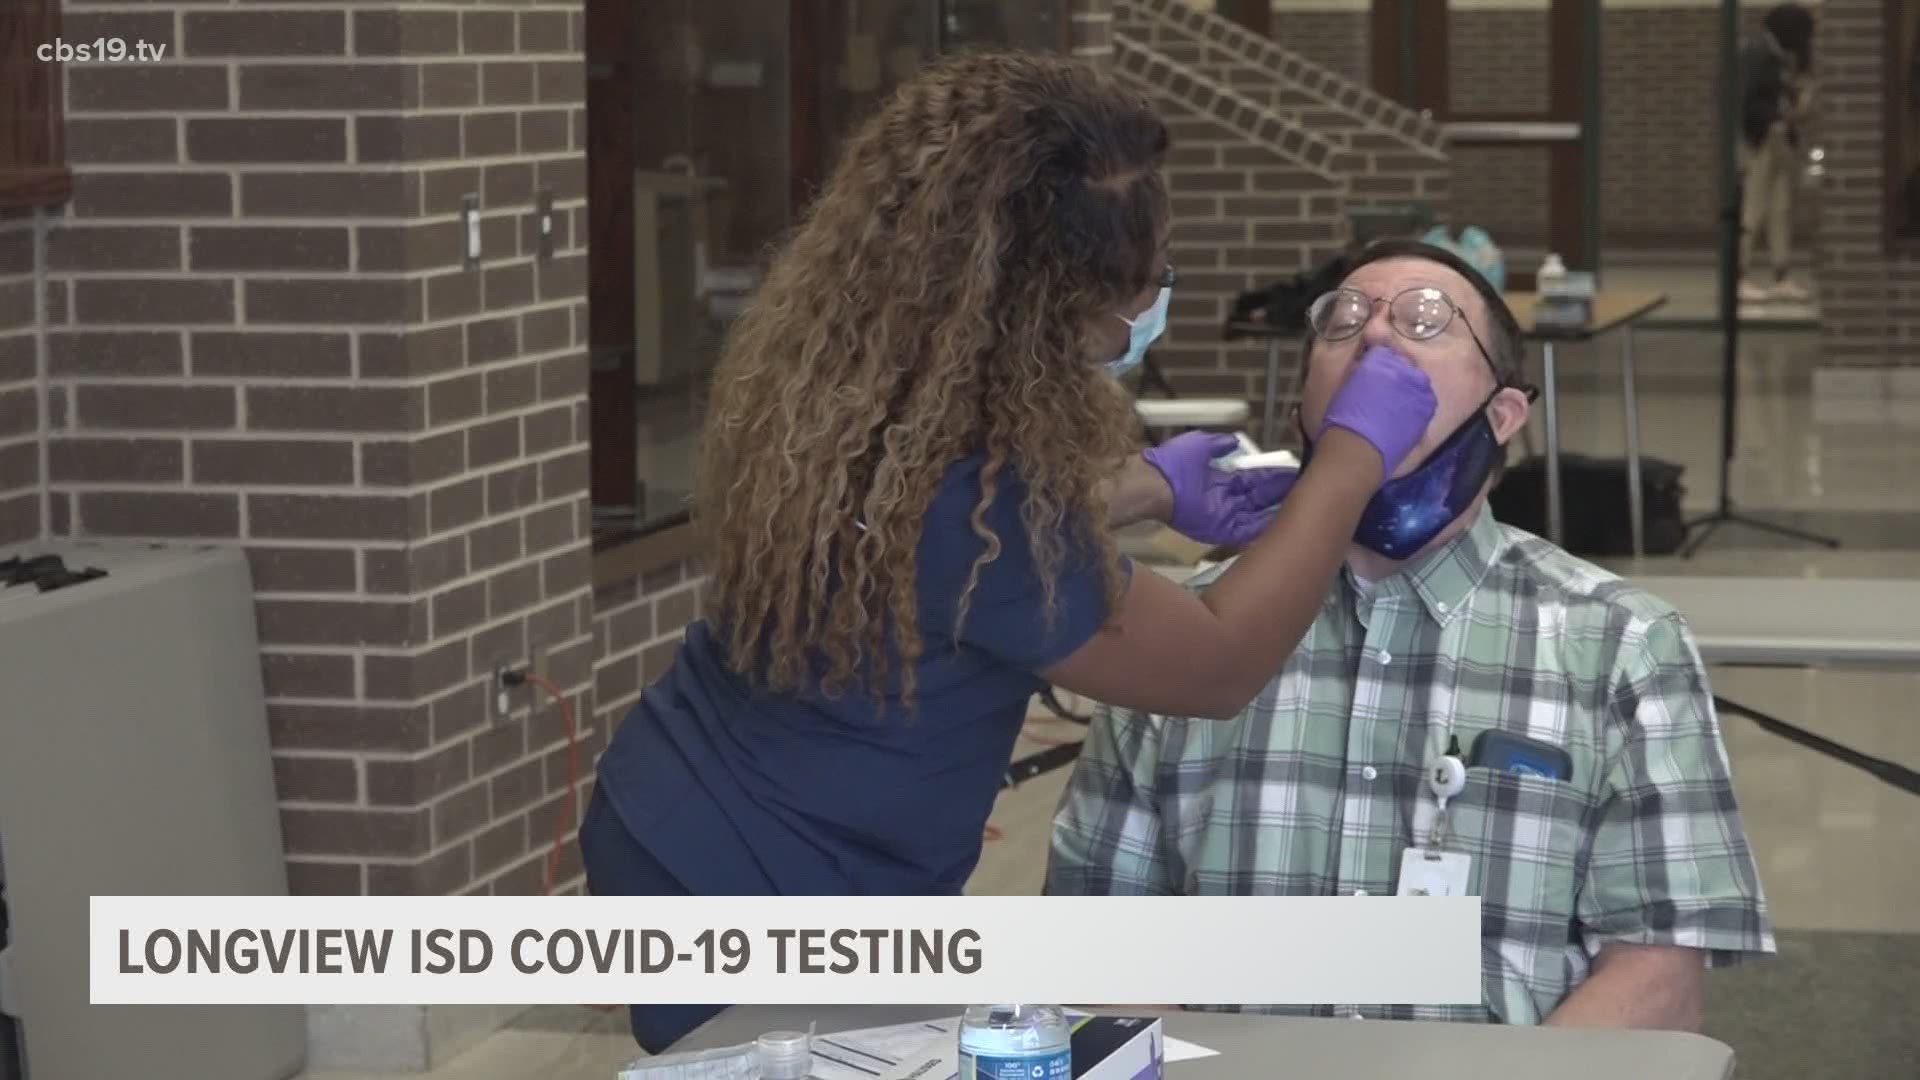 On Wednesday Longview ISD began voluntary testing of COVID-19 for students and staff at Longview High School.